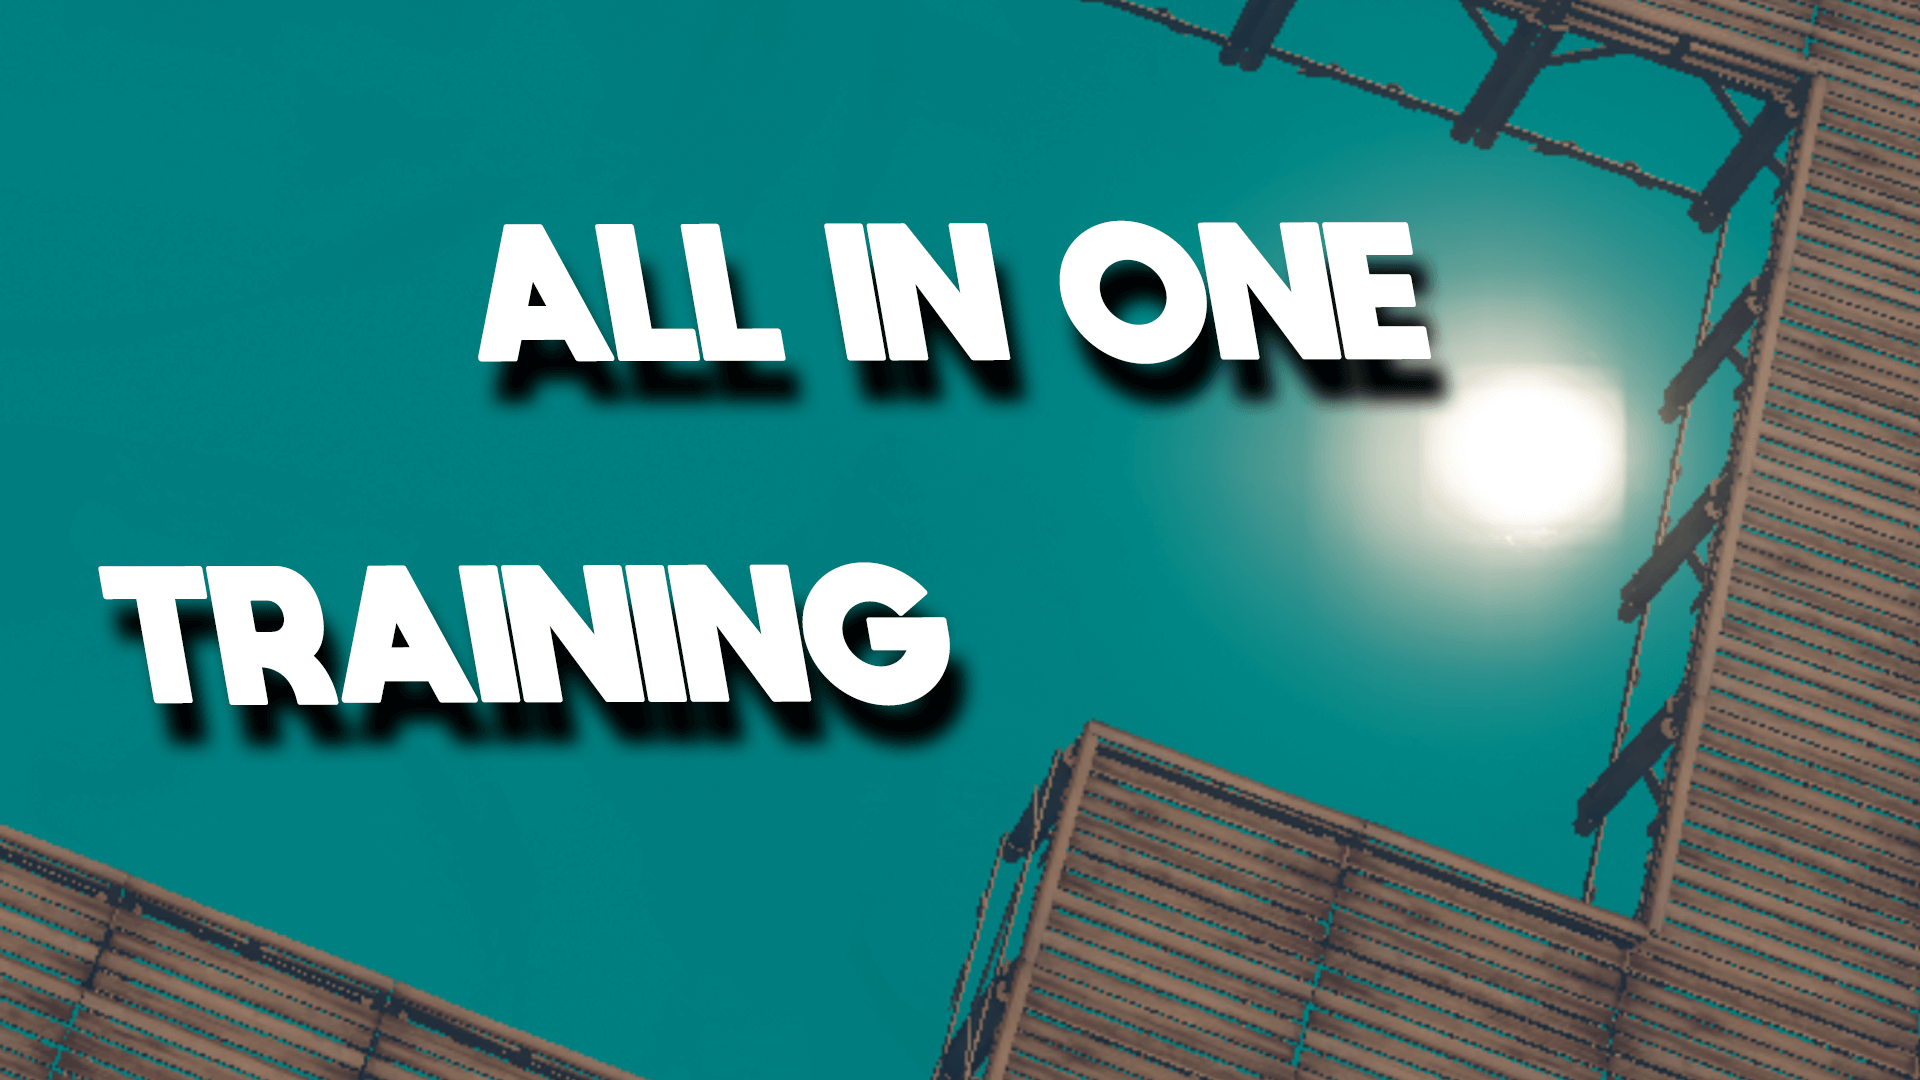 ALL IN ONE TRAINING